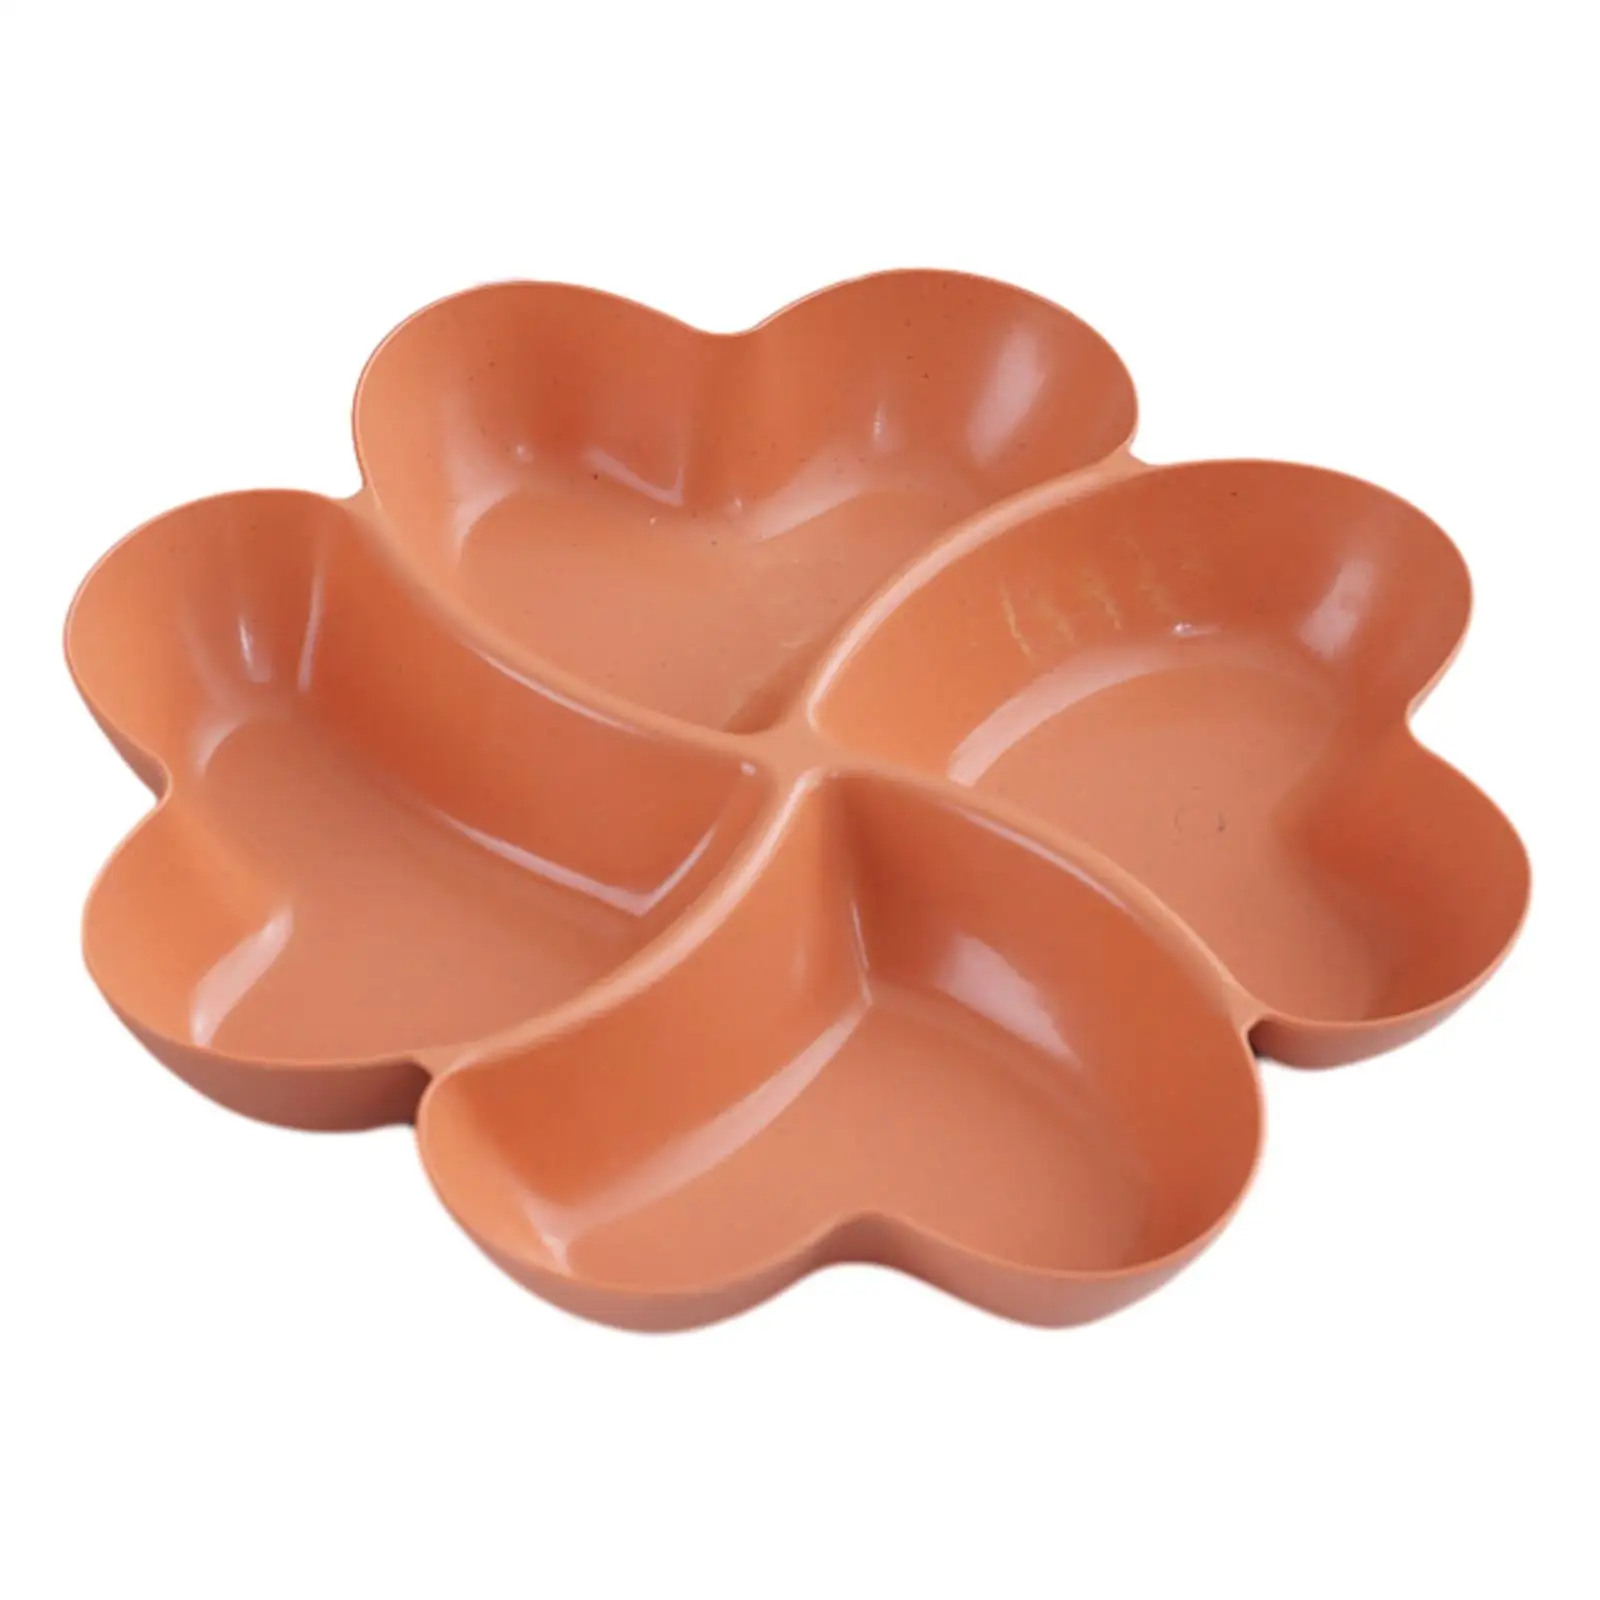 Appetizer Platter Heart Shaped Dip Serving Divided Plates 4 Compartment Dried Fruit Tray for Candy Cakes Home